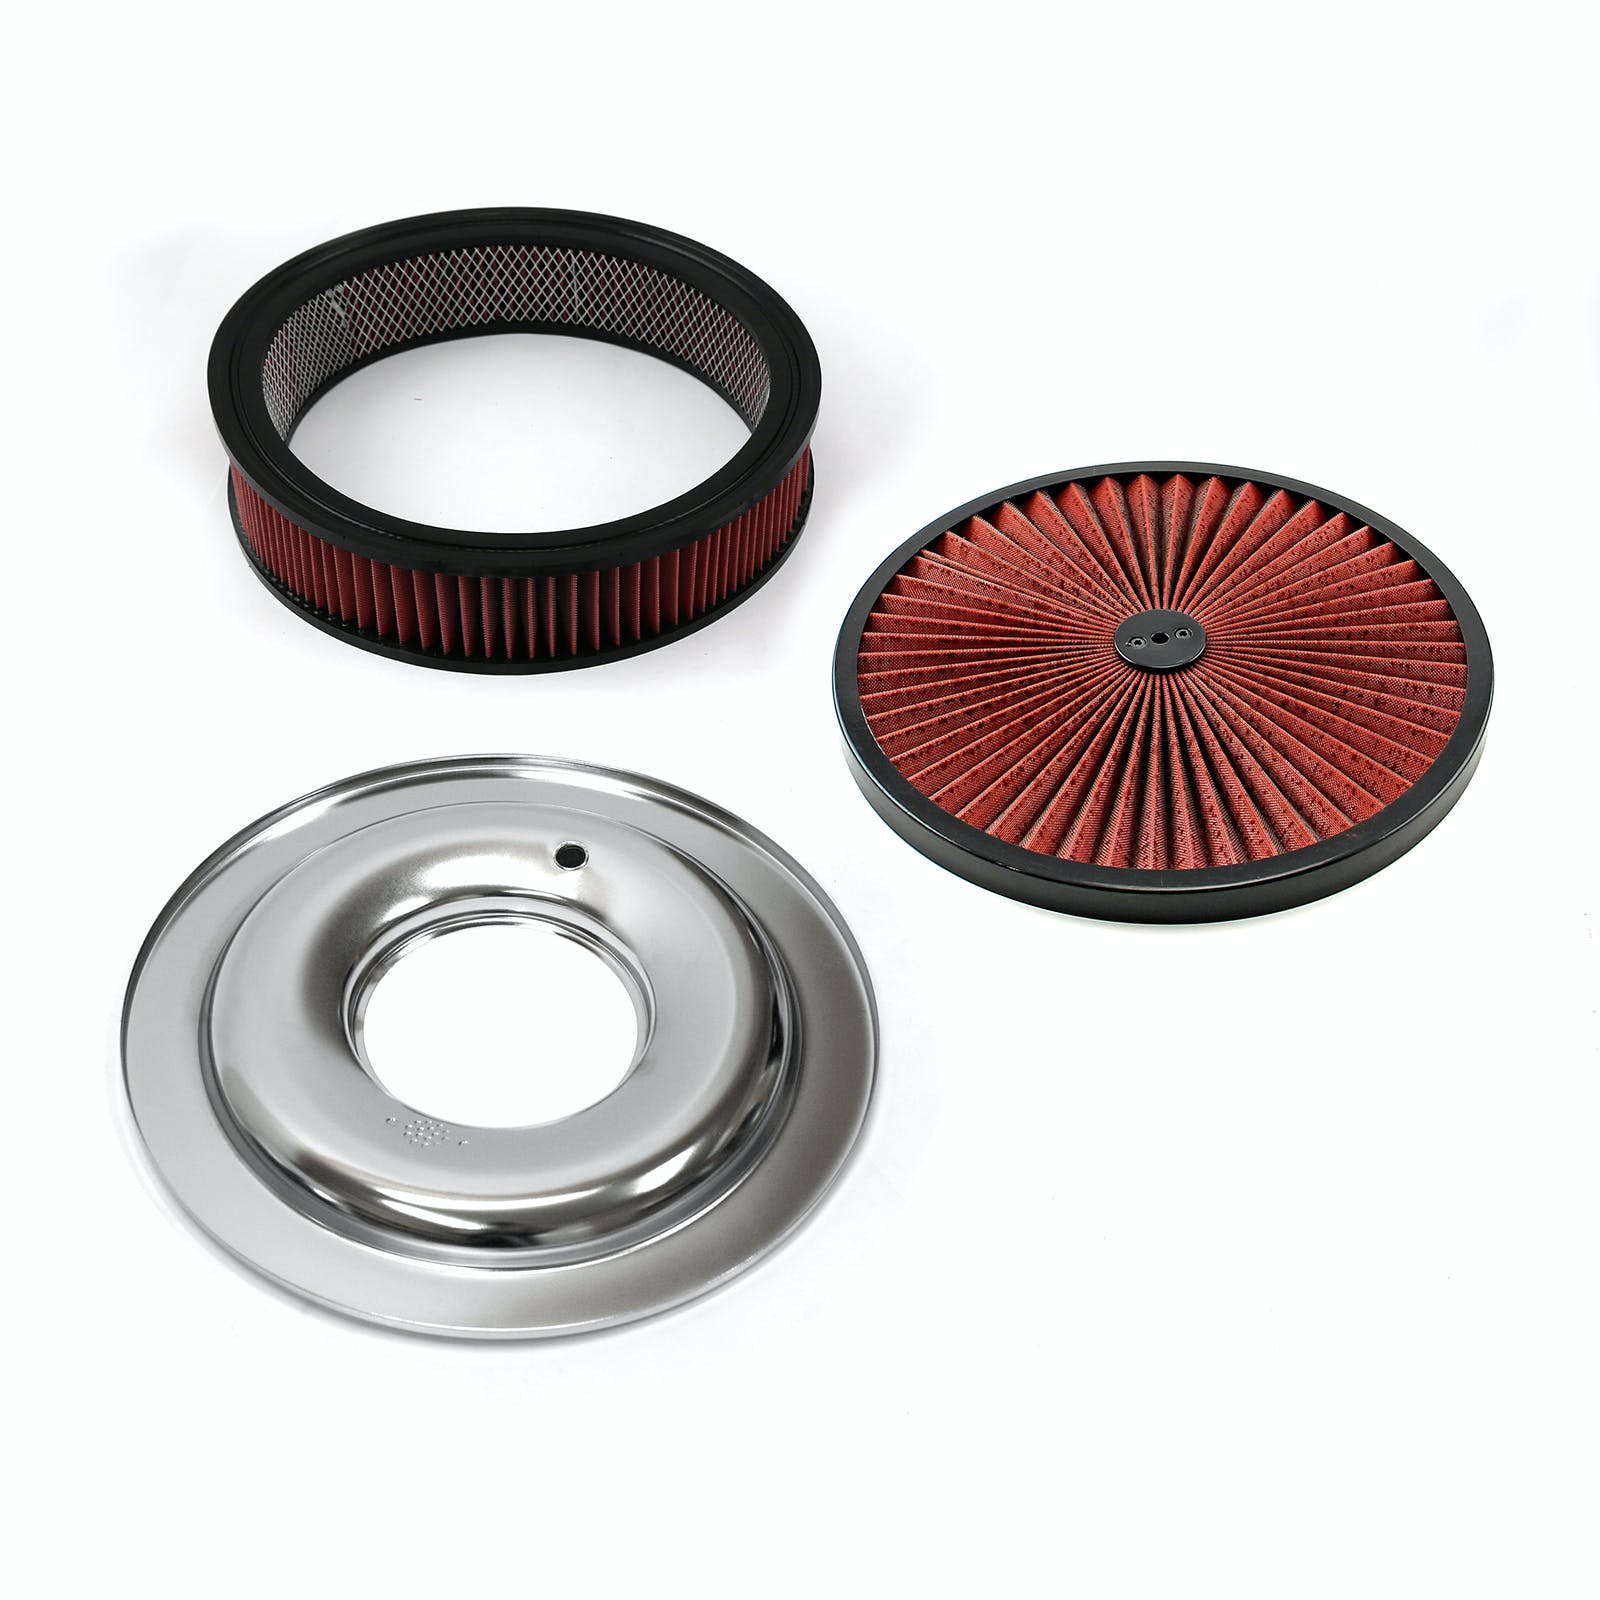 Speedmaster PCE104.1031 14 x 3 Washable Element Extreme Top w/Blk Ring Flat Base Air Cleaner Kit